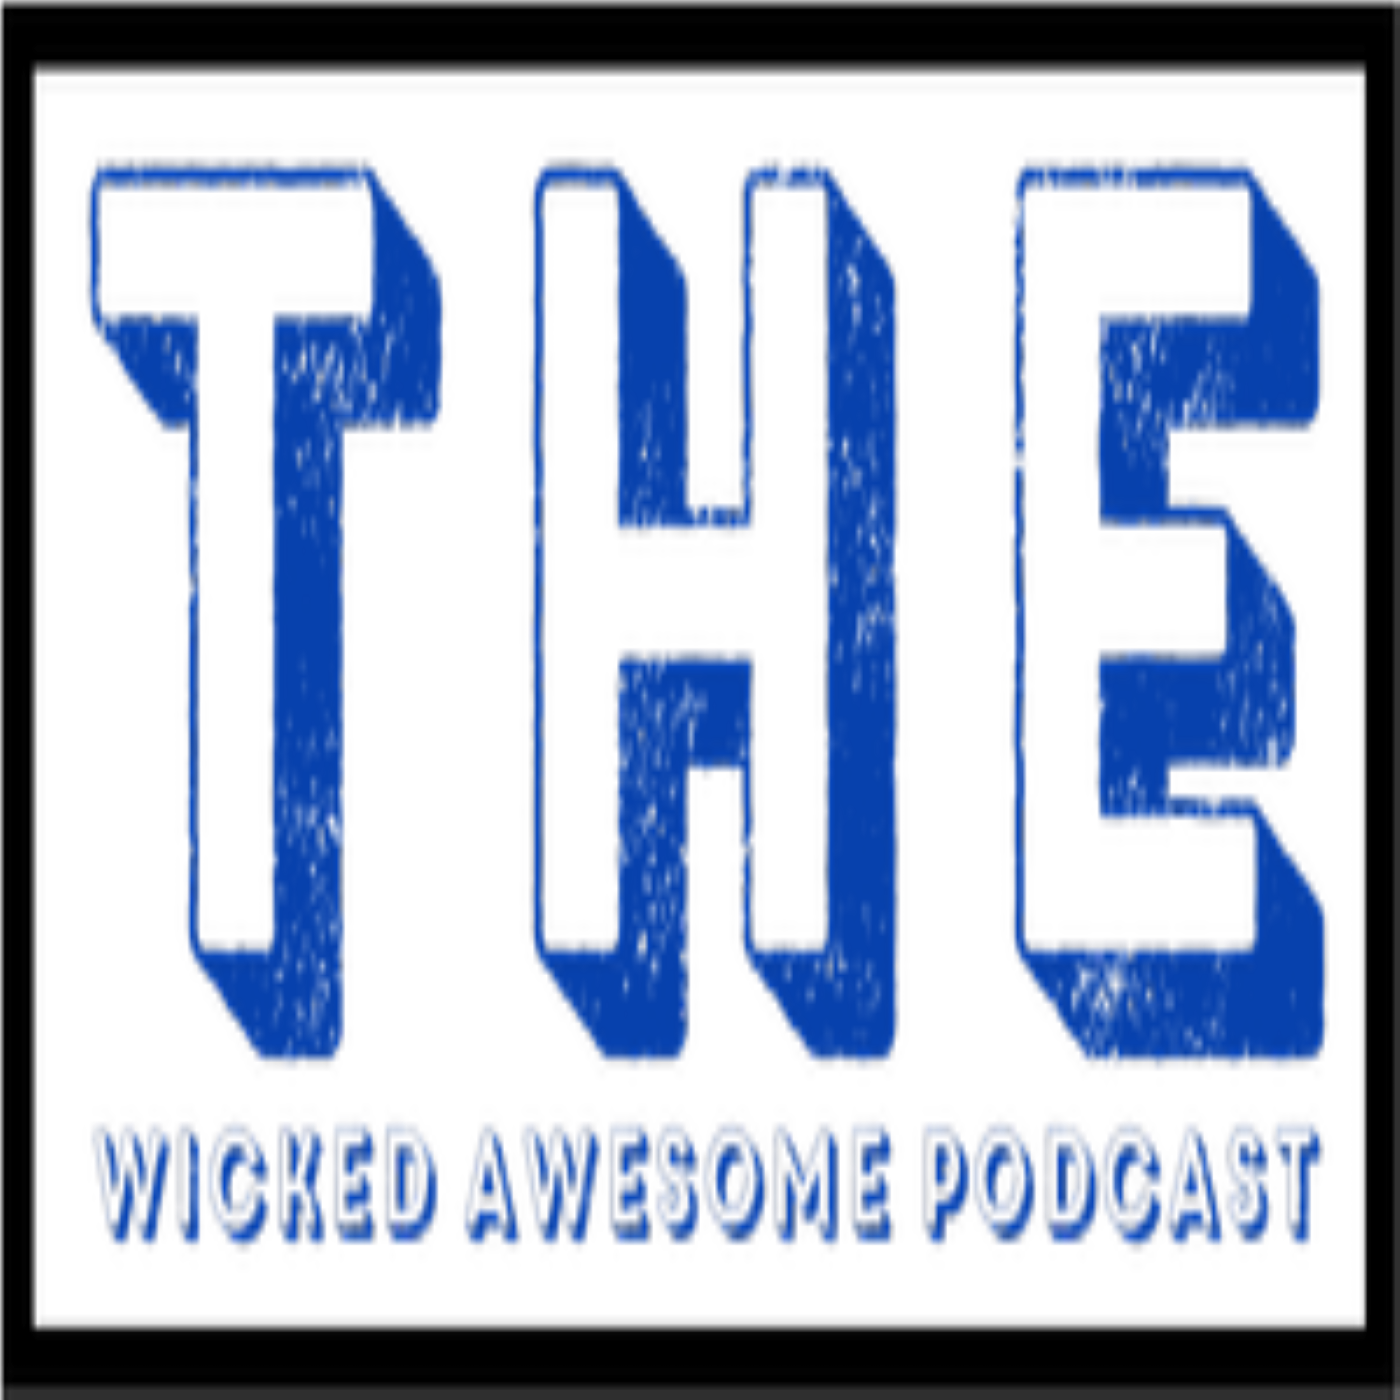 The Wicked Awesome Podcast